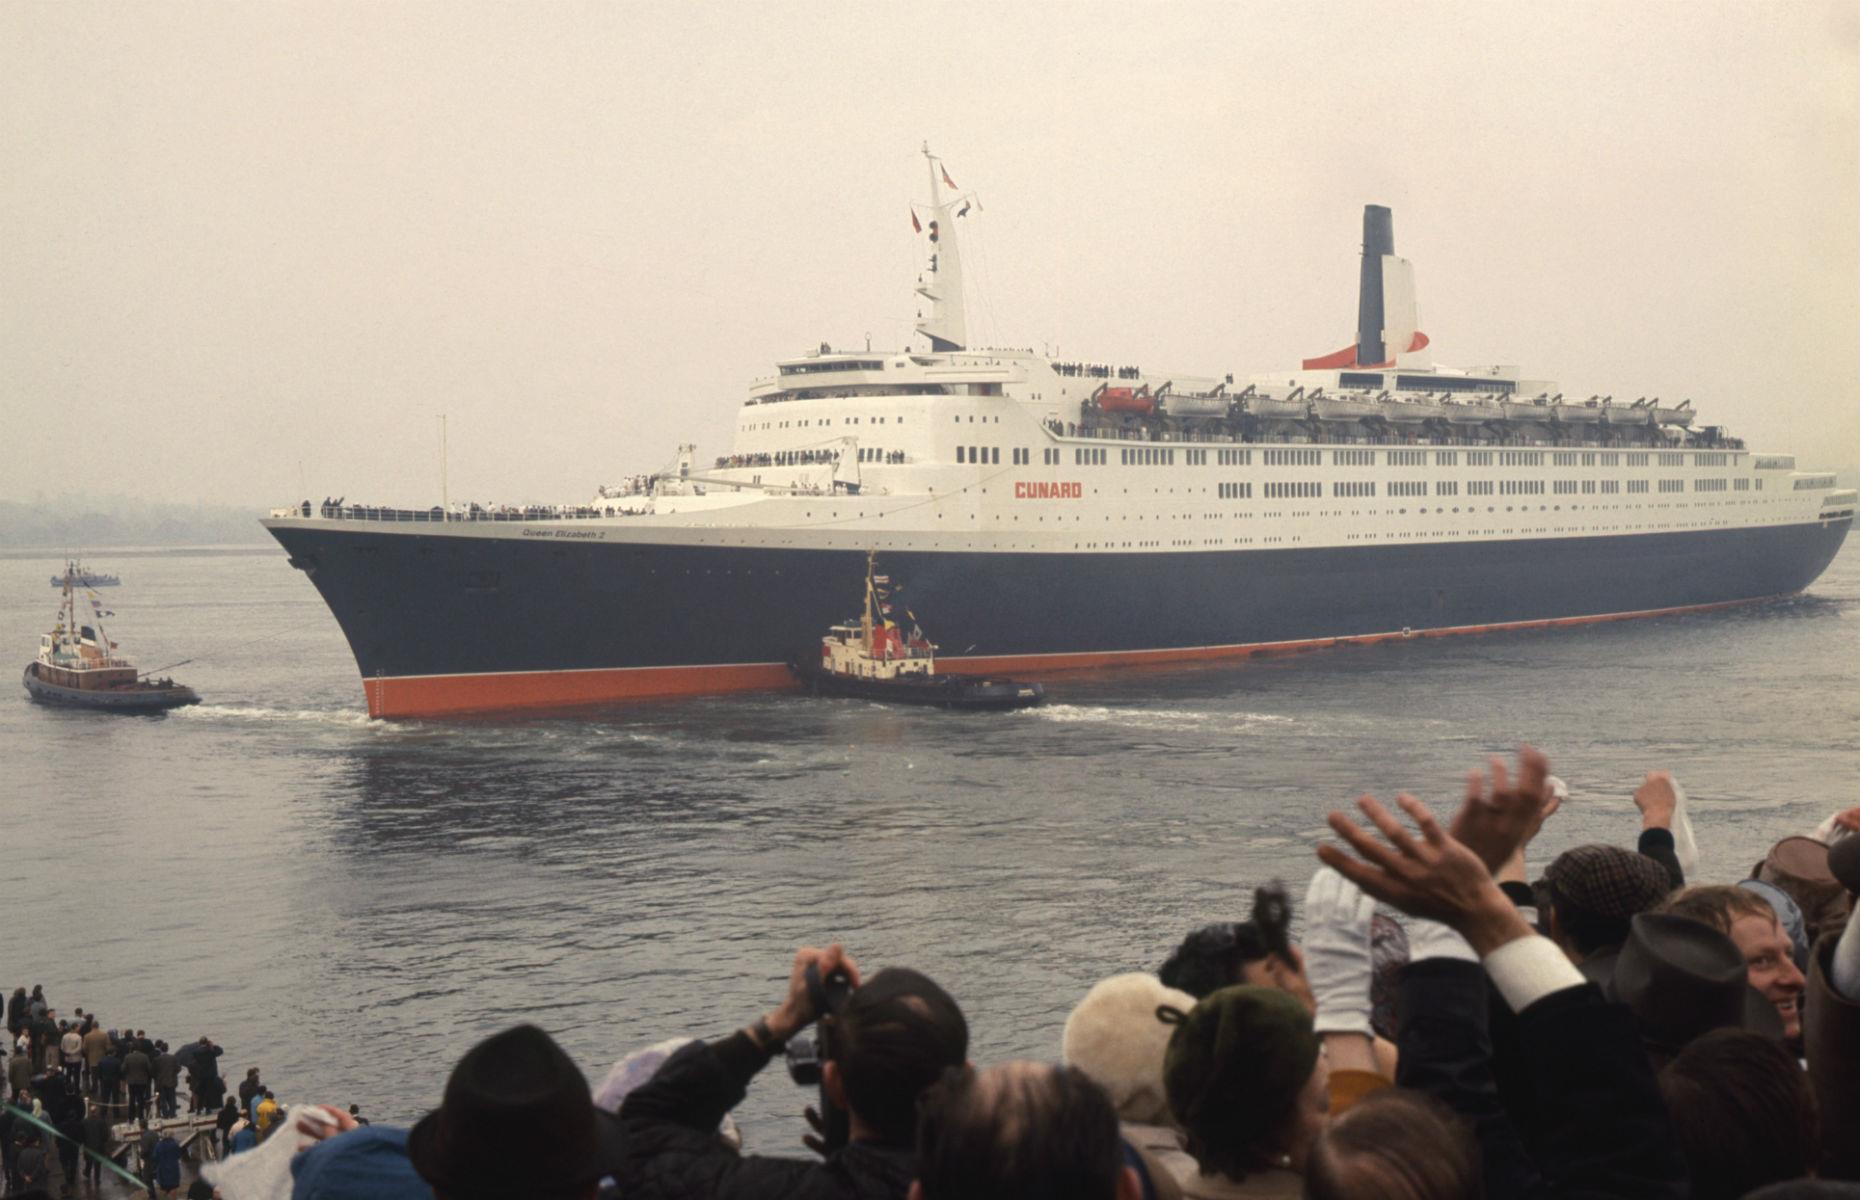 <p>Another iconic luxury liner built by Cunard, the 963-foot-long (293m) Queen Elizabeth 2 (or QE2 as it's better known) set sail on her maiden voyage from Southampton to New York in May 1969, with crowds of well-wishers (pictured) waving her off. In her 39 years at sea, the QE2 completed 806 Atlantic crossings and 25 trips around the world, racking up millions of nautical miles as a cruise liner and, for a brief stint, a troopship in the Falklands War. </p>